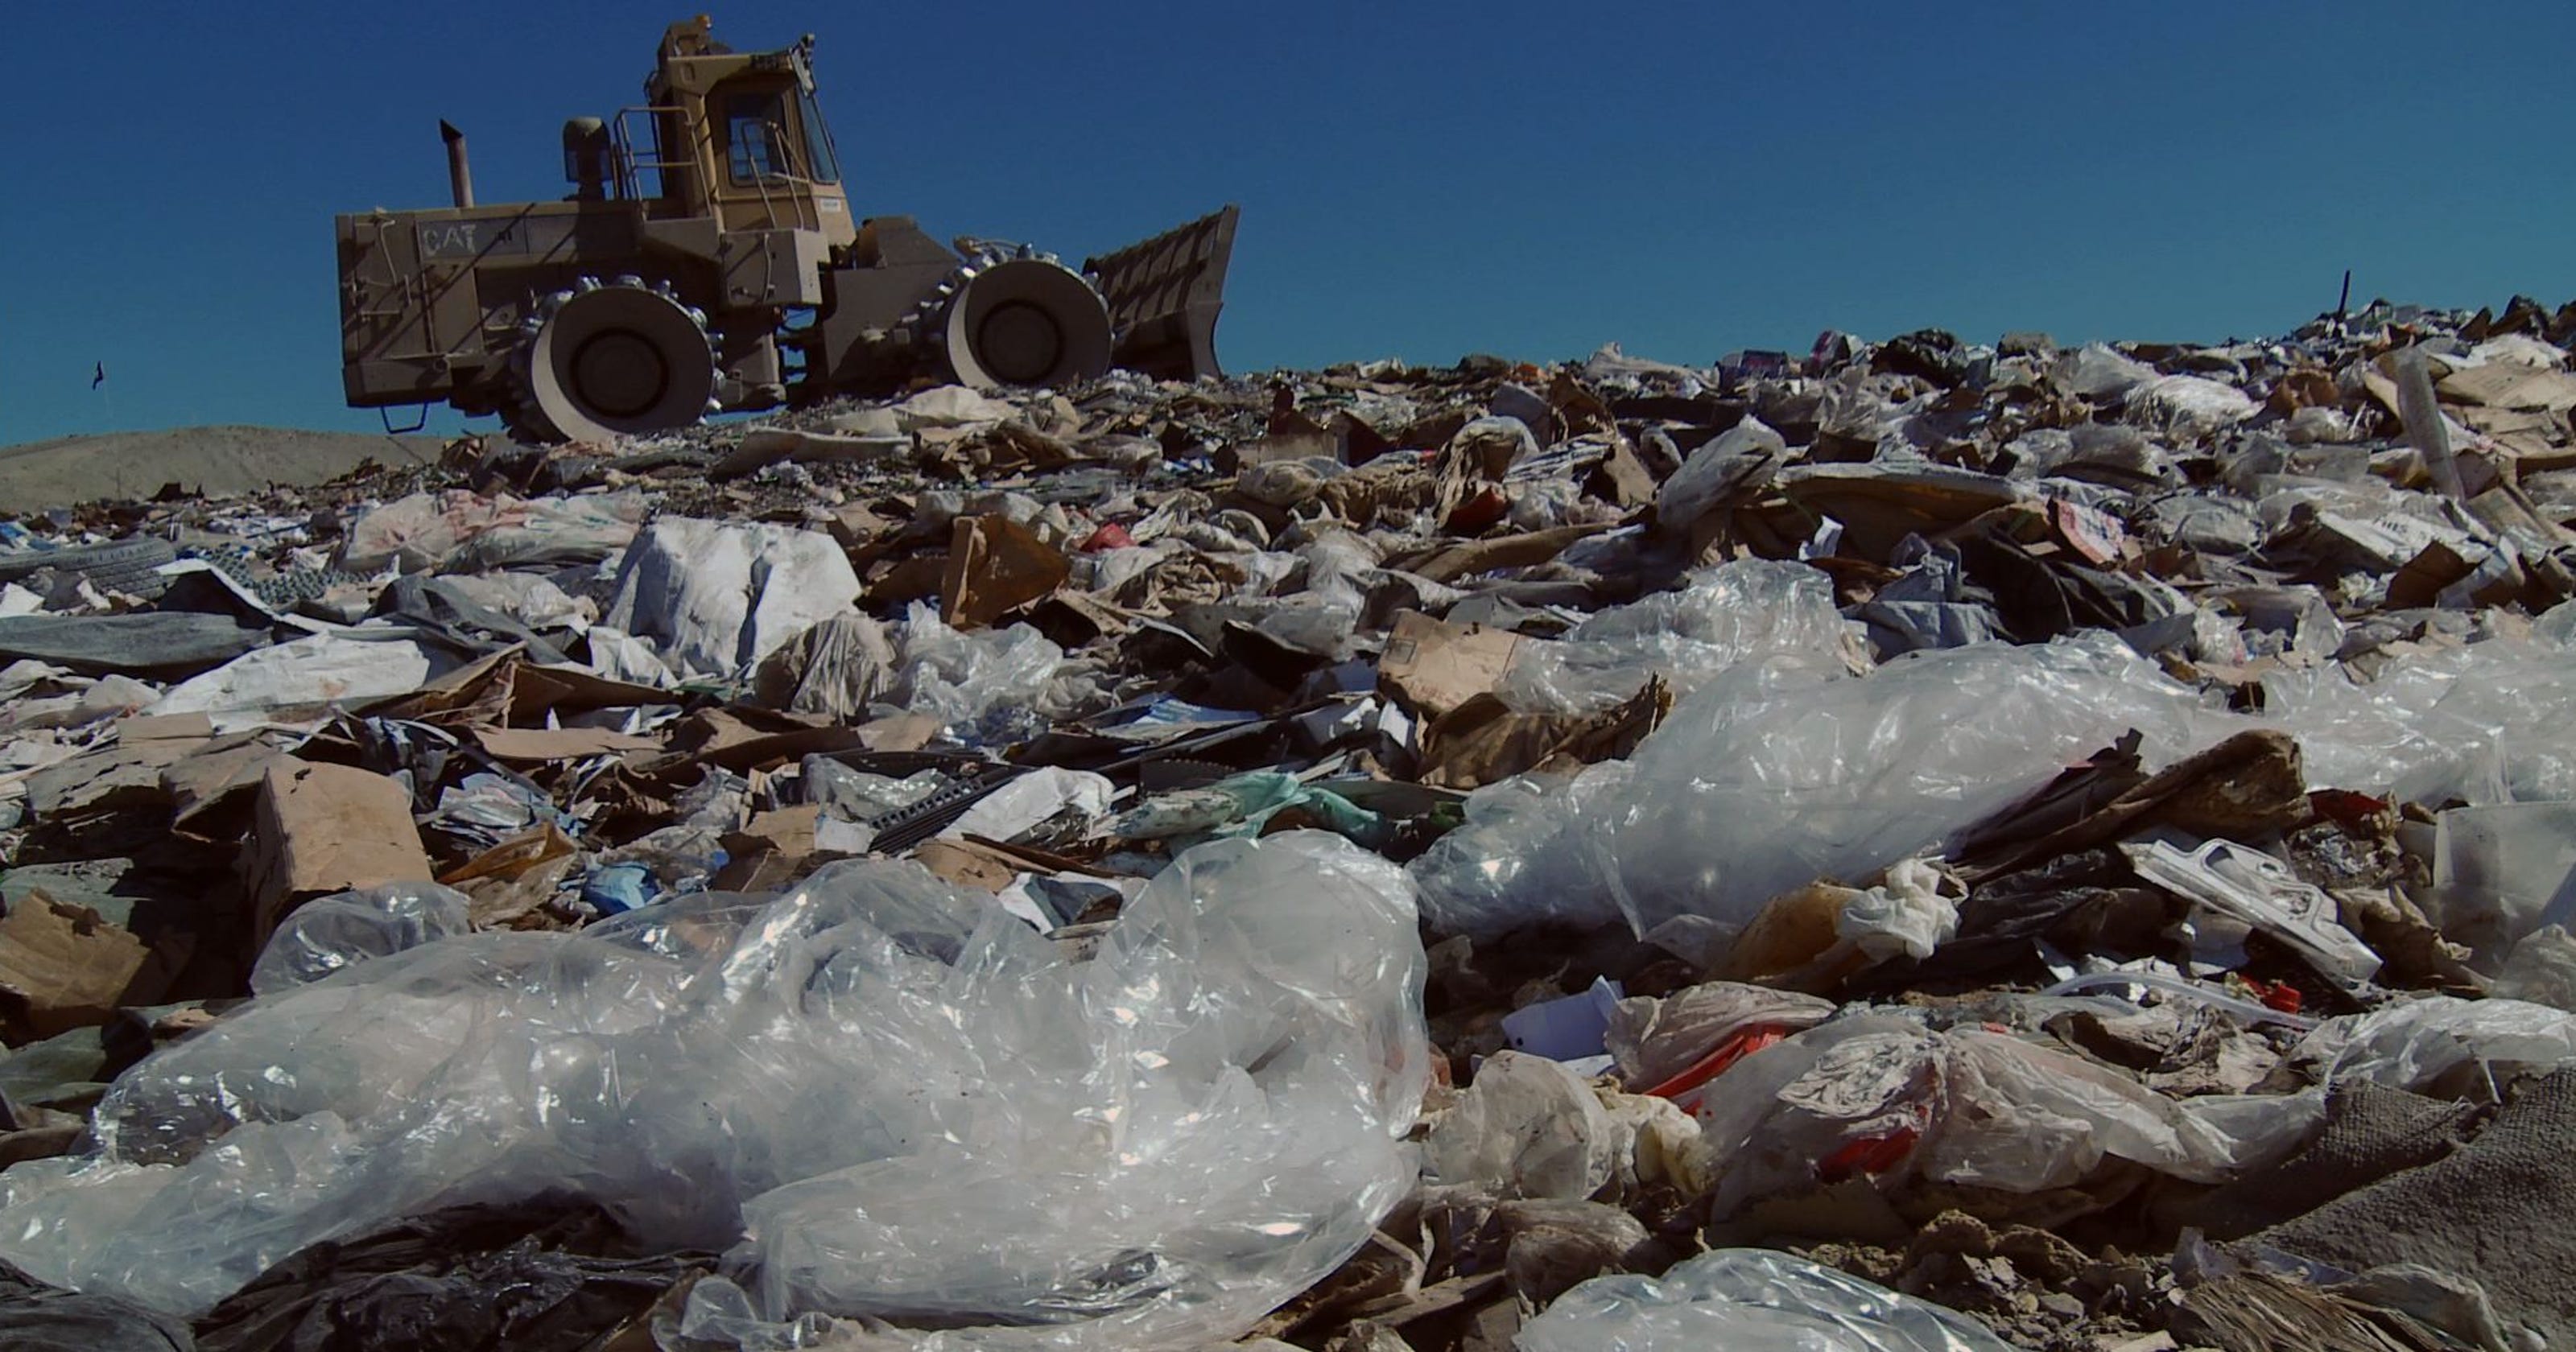 Documentary warns of dangers of plastic-filled world